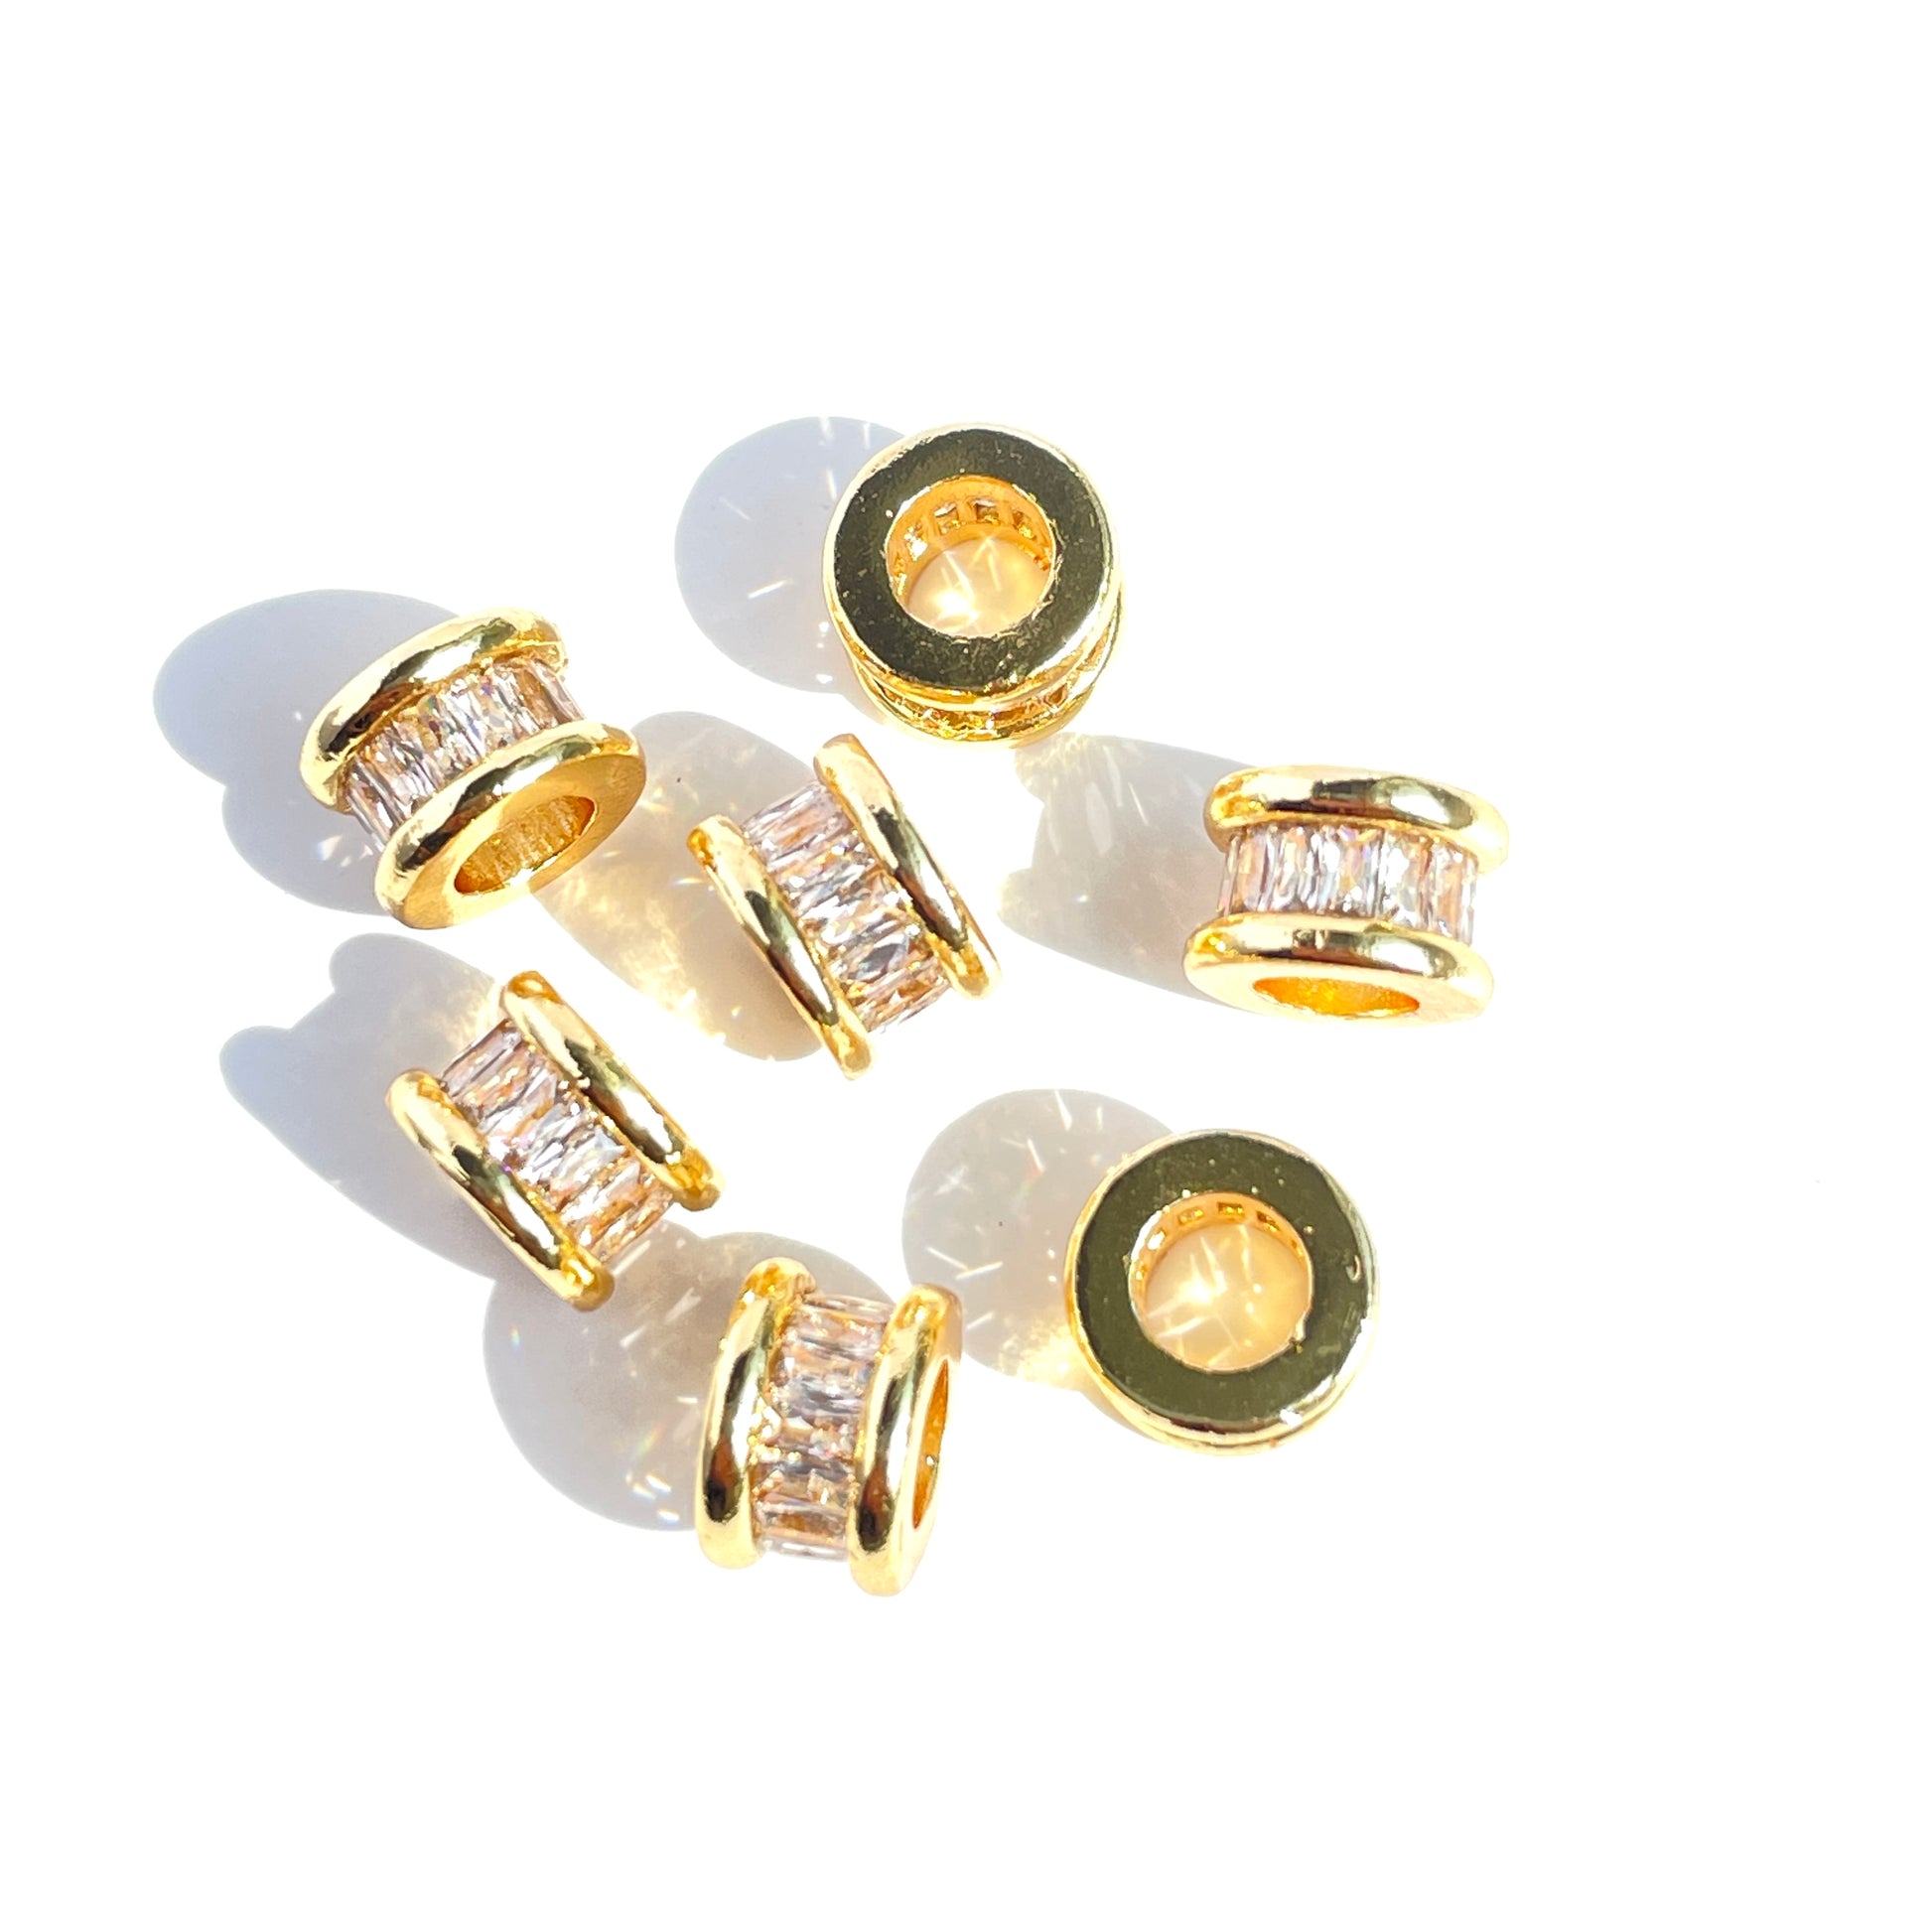 10pcs/lot 9*6mm CZ Paved Big Hole Wheel Spacers Gold CZ Paved Spacers Big Hole Beads New Spacers Arrivals Charms Beads Beyond